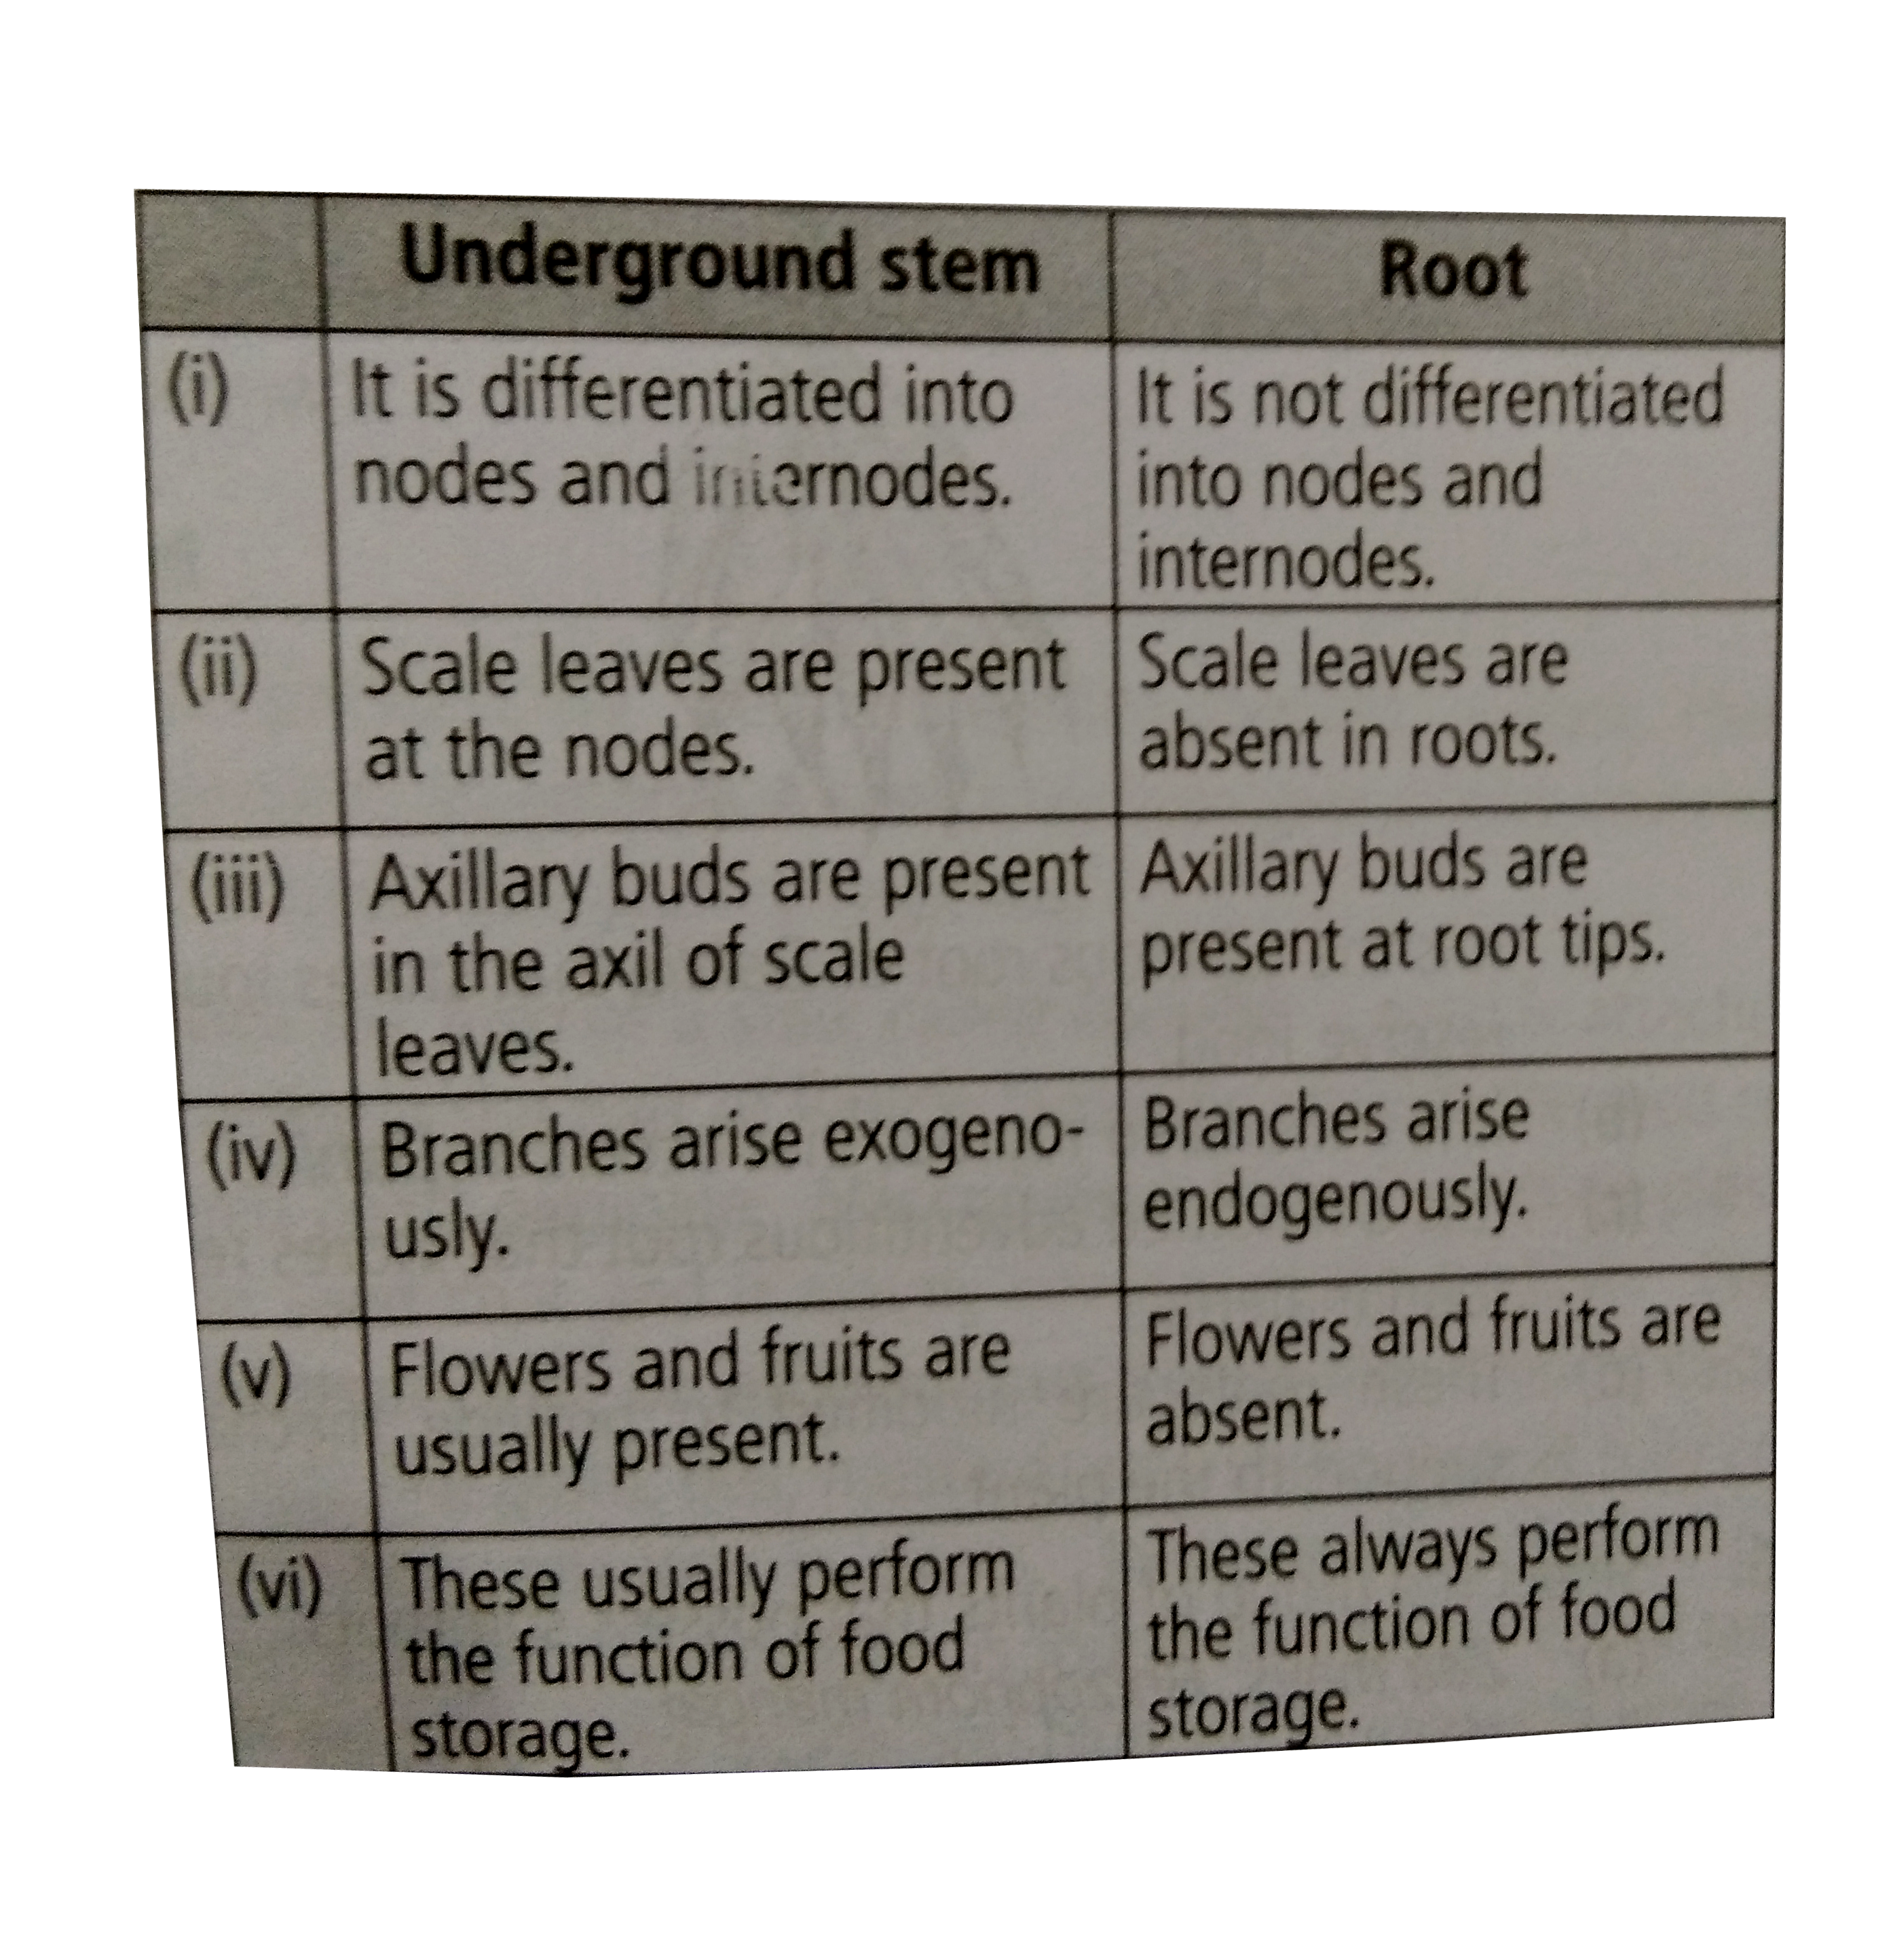 Given are some difference between an underground stem and a root. Select the option that identifies the incorrect pair of differences.